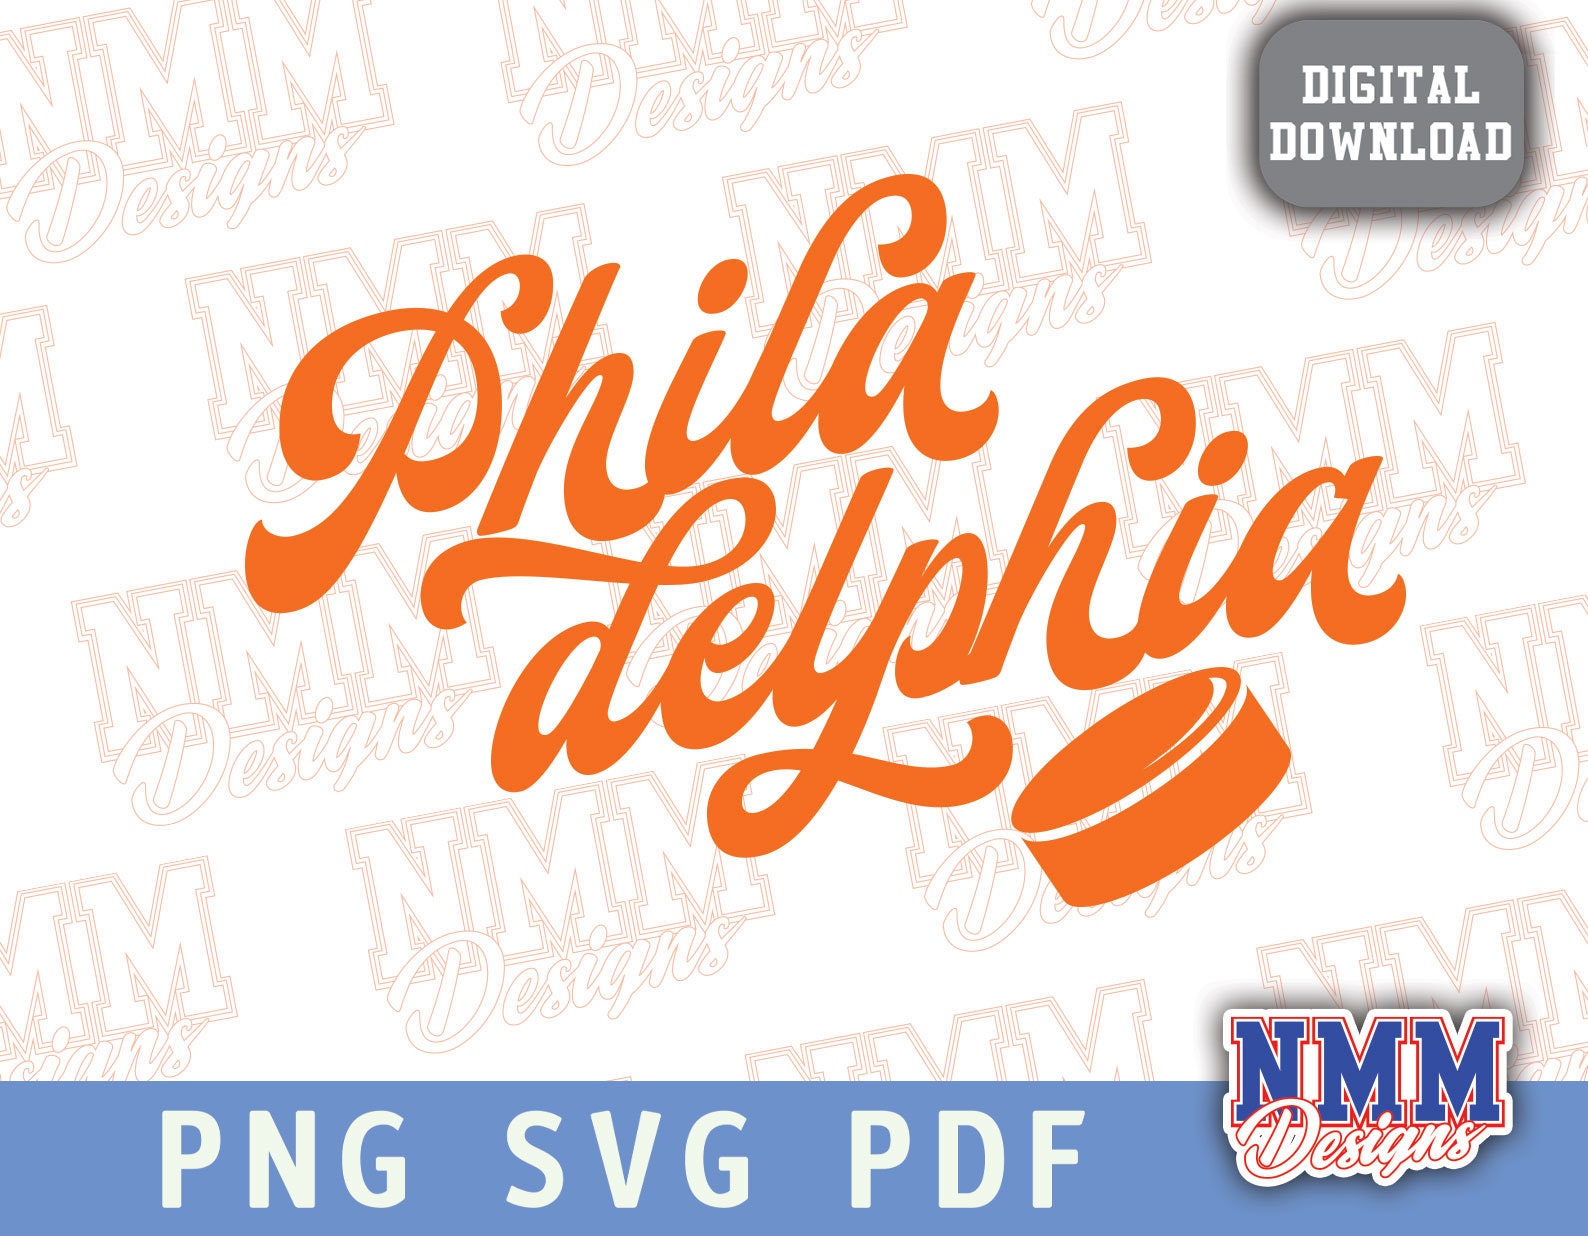 NHL Philadelphia Flyers, Philadelphia Flyers SVG Vector, Philadelphia Flyers  Clipart, Philadelphia Flyers Ice Hockey Kit SVG, DXF, PNG, EPS Instant  Download NHL-Files For Silhouette, Files For Clipping. - Gravectory